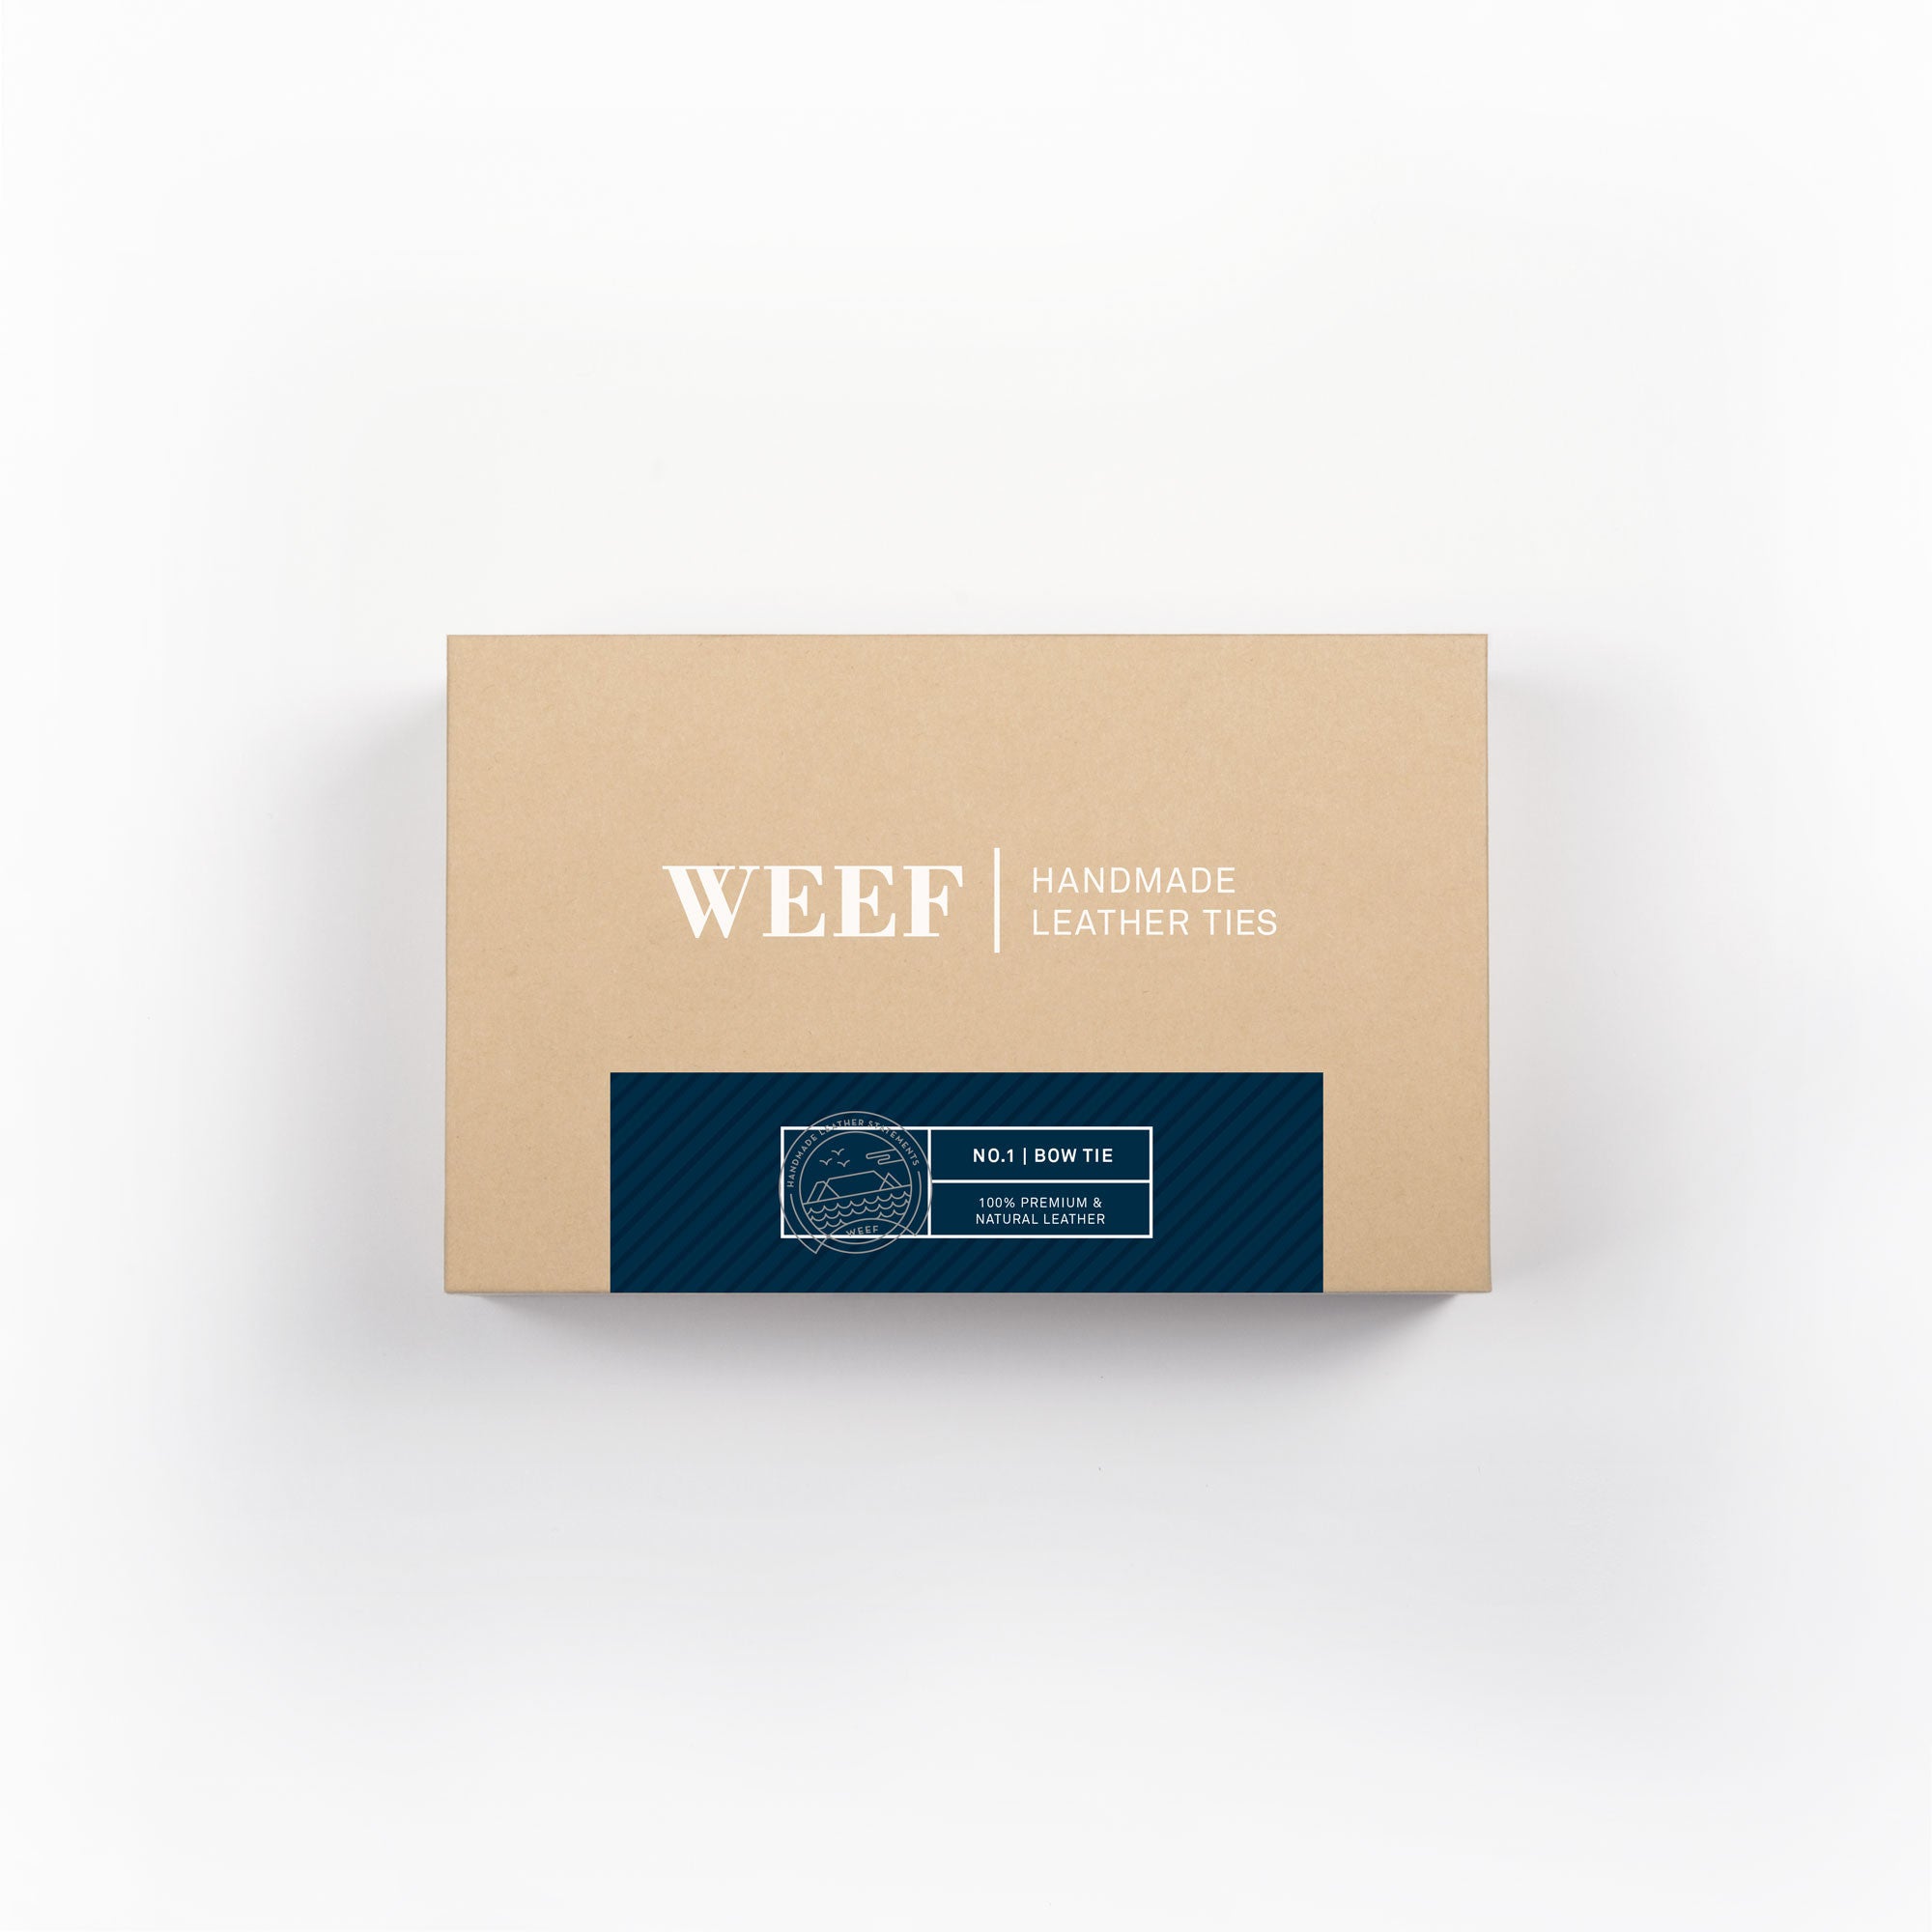 This is the premium packaging box of the deep navy WEEF handmade leather bow tie.